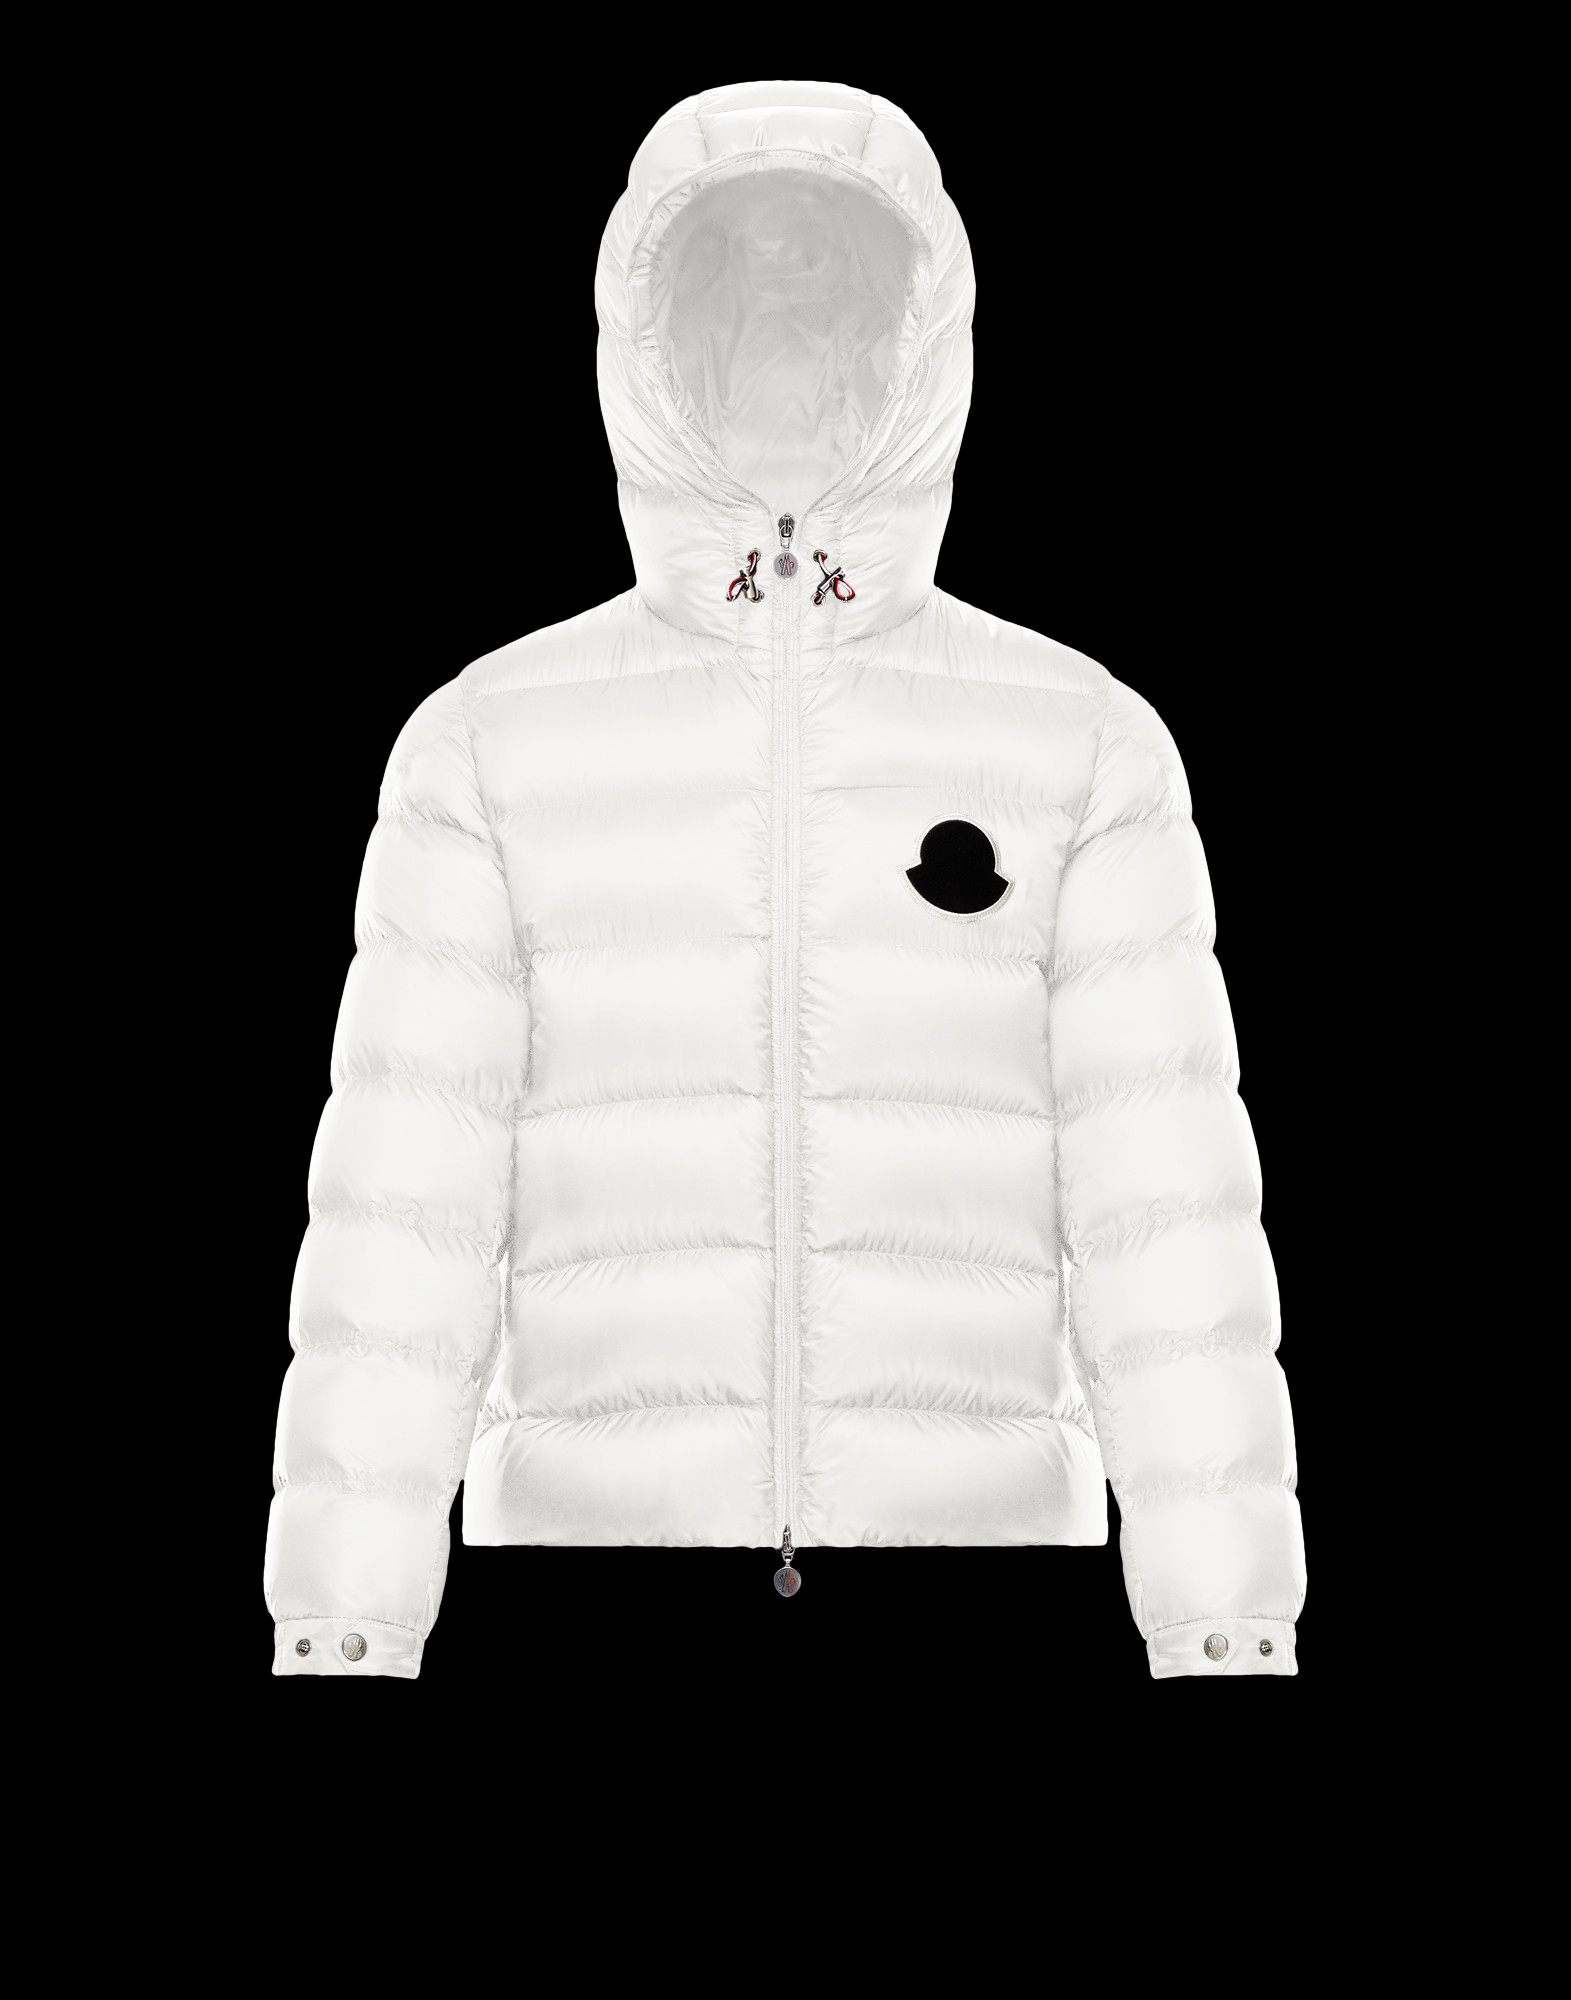 moncler which country brand